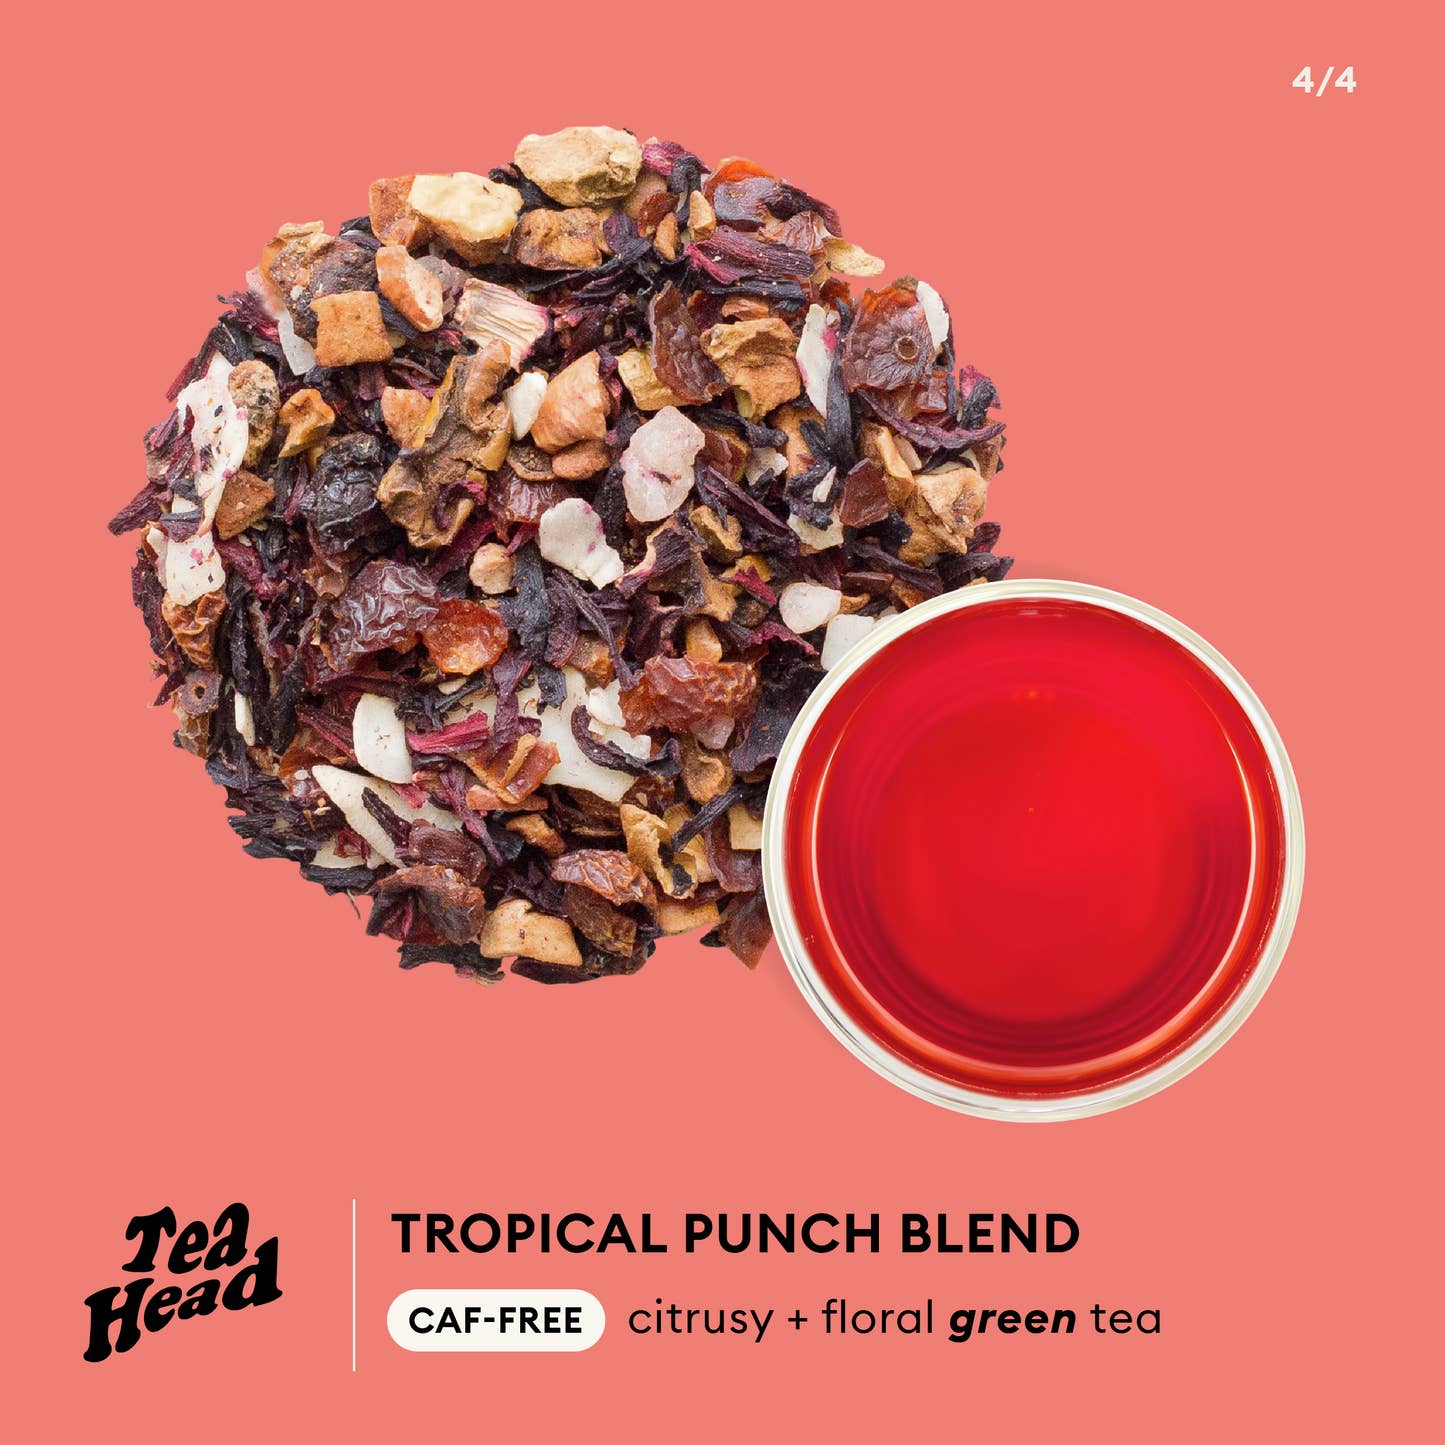 Tropical Punch Blend by Tea Head Infographic - CAF-FREE citrusy + floral green tea